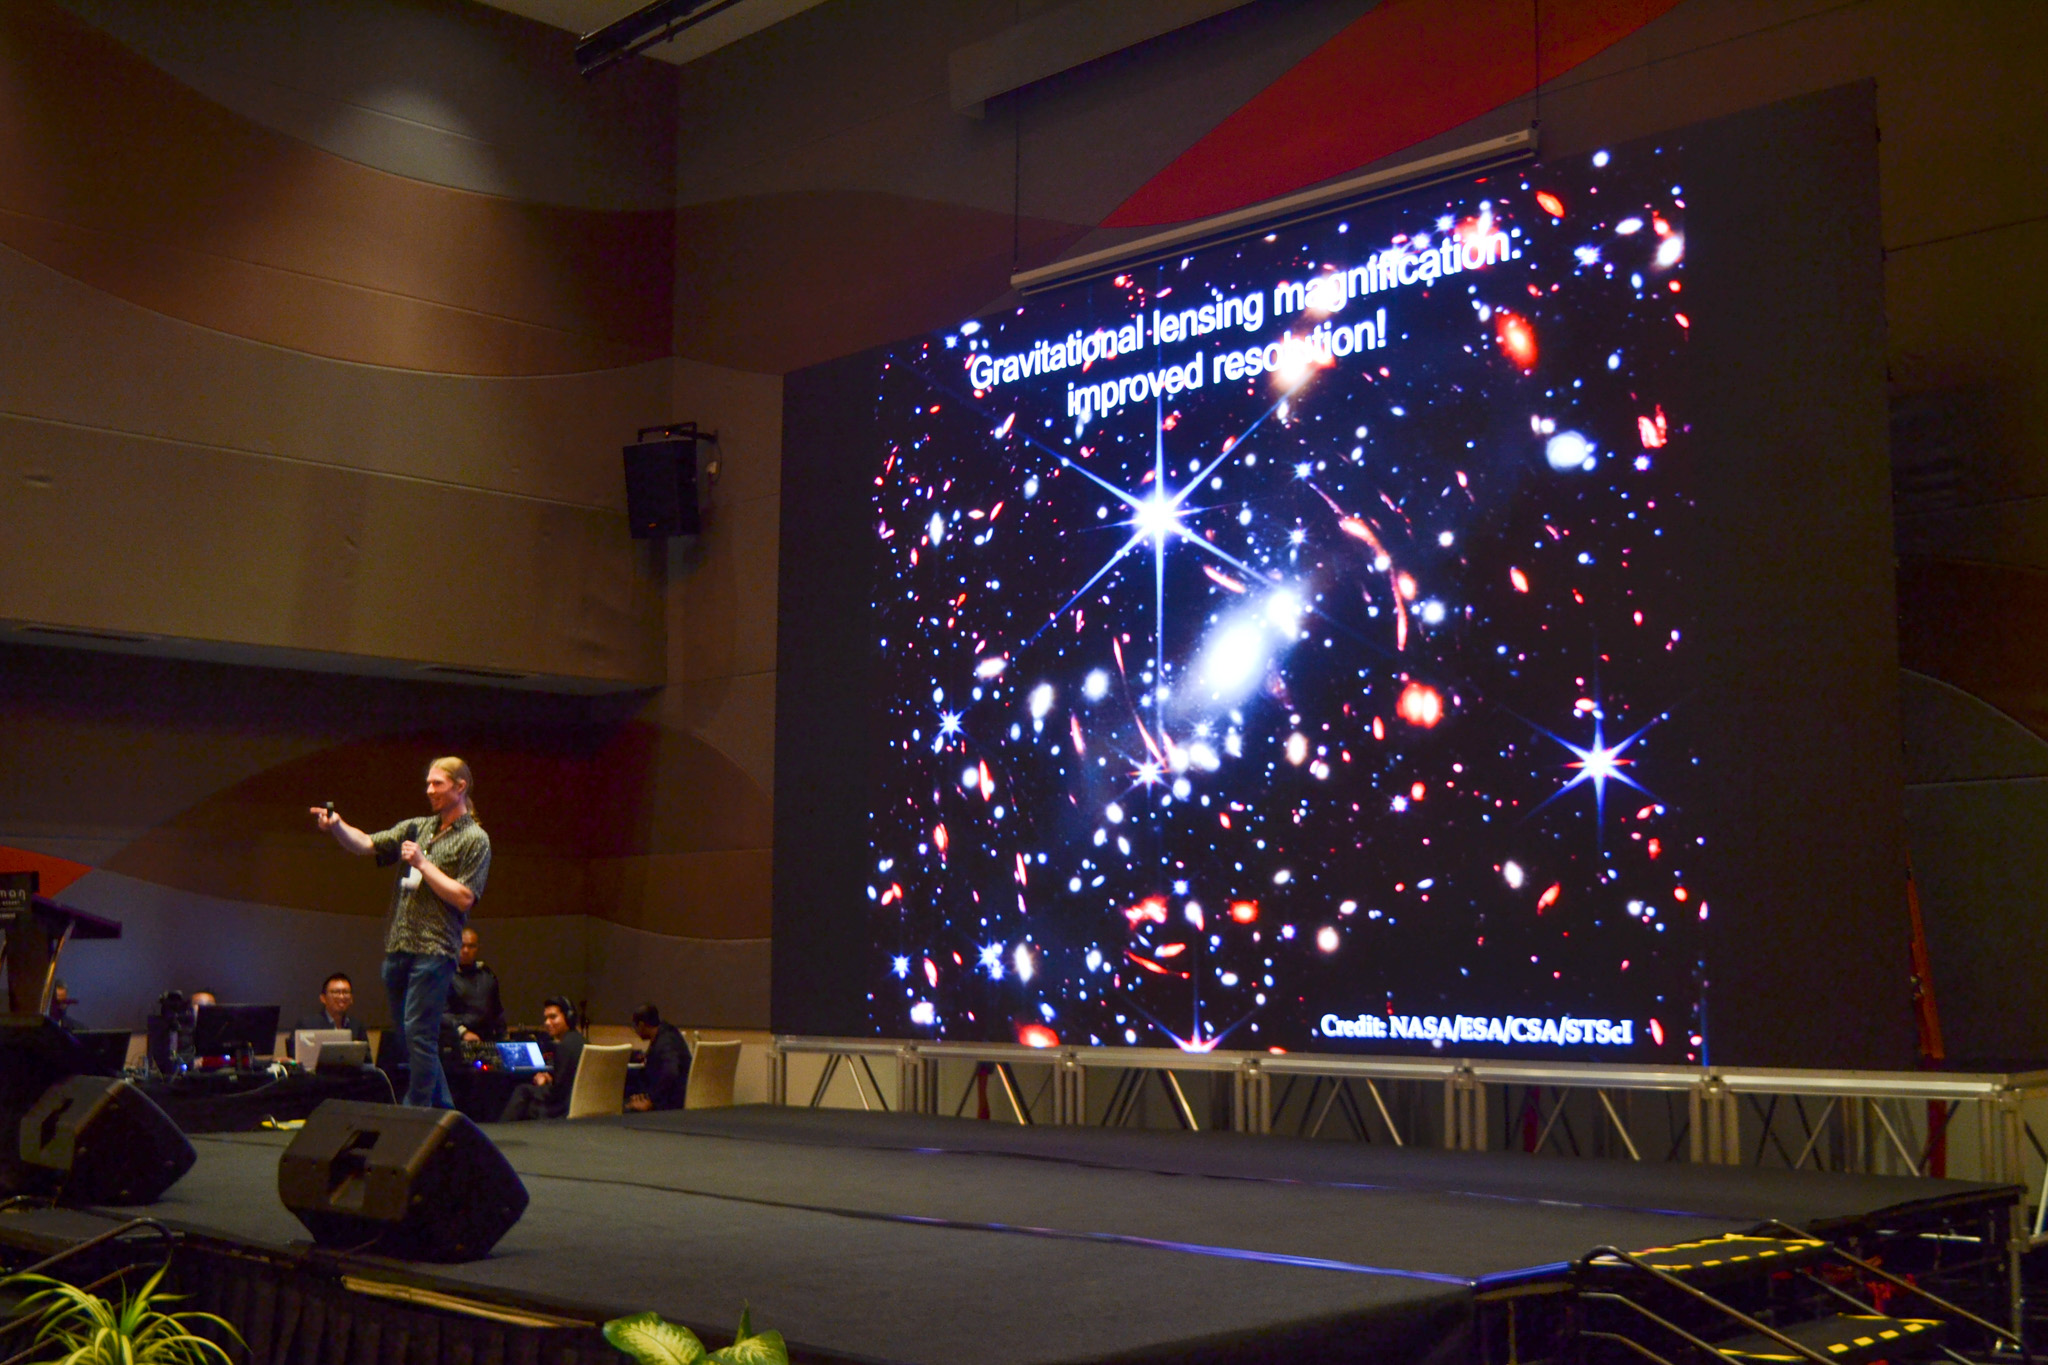 Tucker Jones stands center stage while delivering a talk. Behind him, a screen shows an image of the universe. 